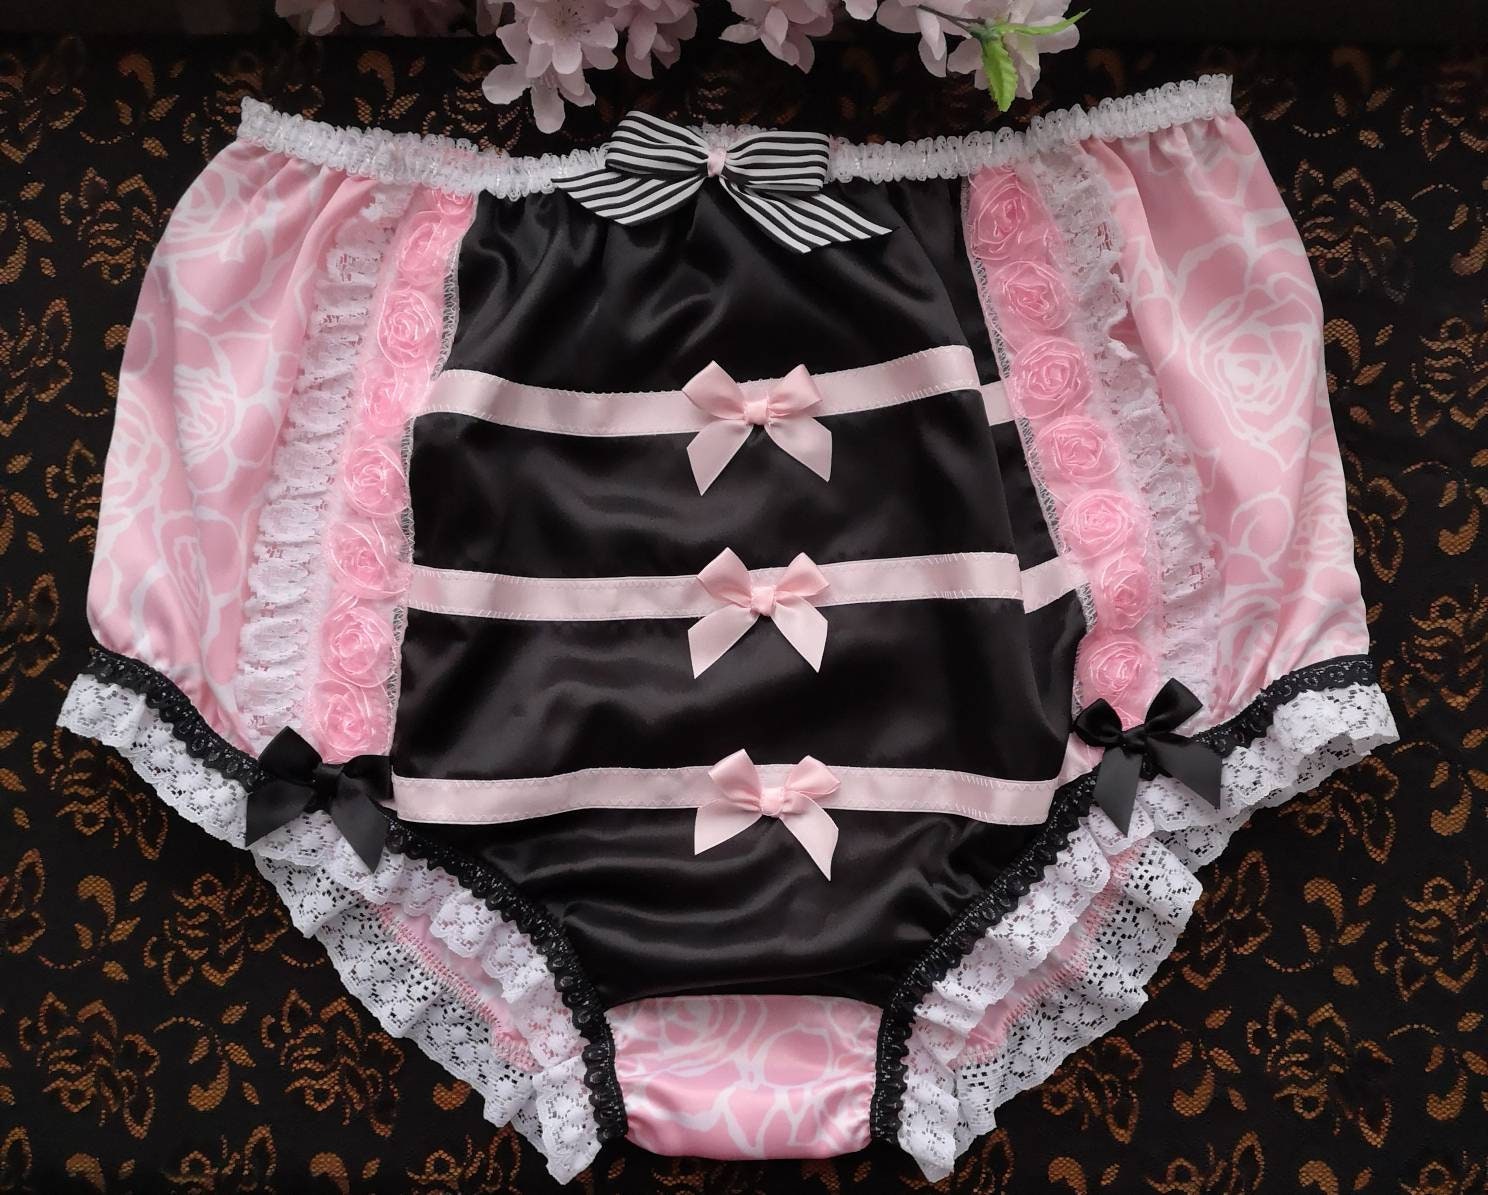 Rose Pink Printed Full Fit Silky Satin Sissy Panties contrast Front Panel.  Made to Order. Medium up to Extra Extra Large. -  Norway